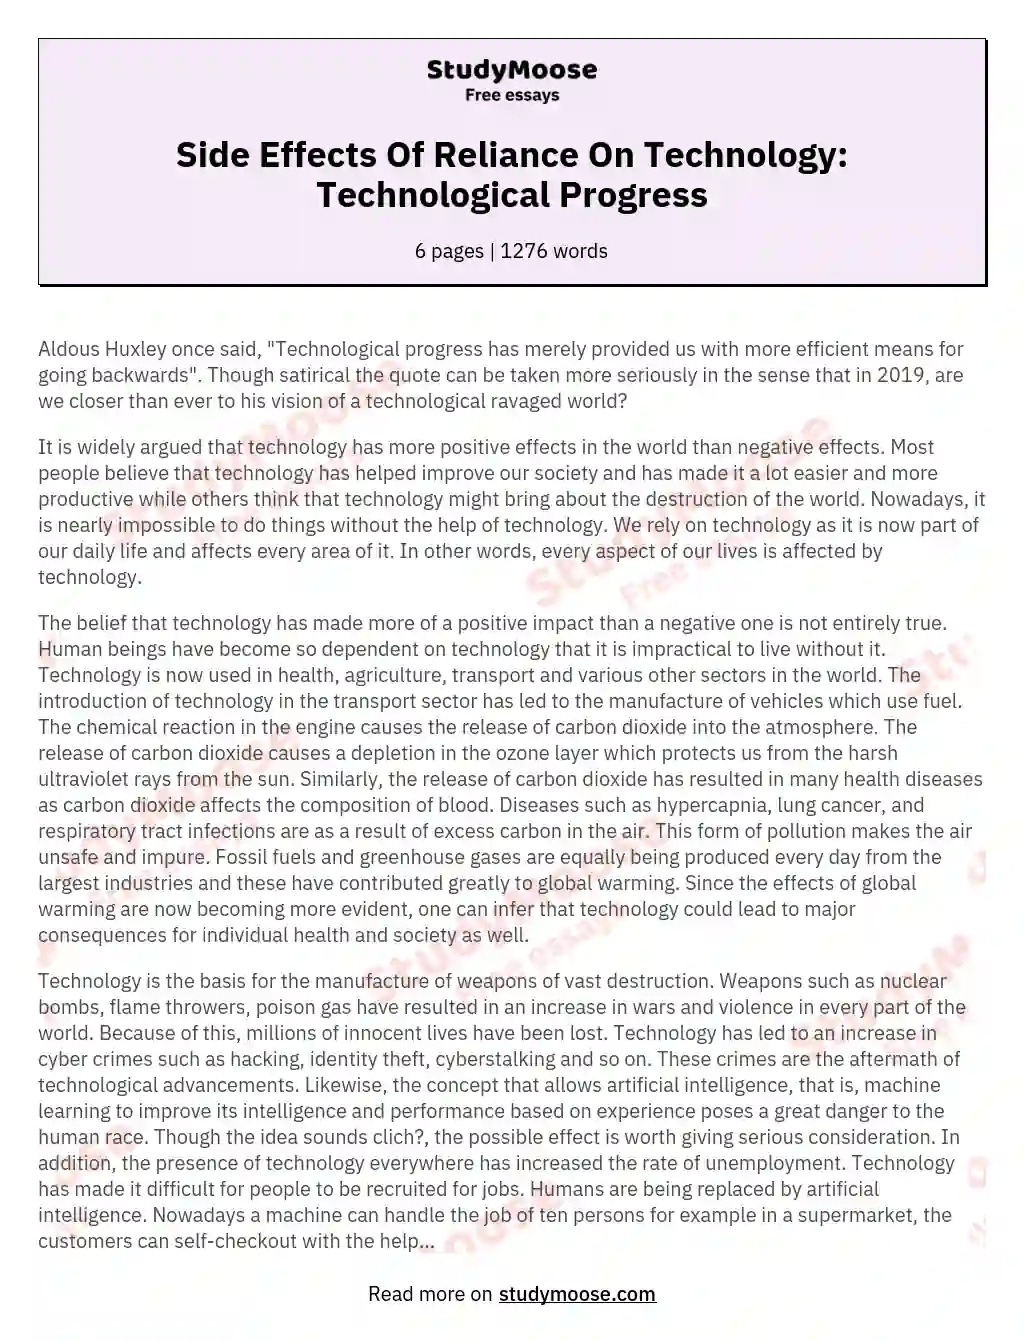 Side Effects Of Reliance On Technology: Technological Progress essay